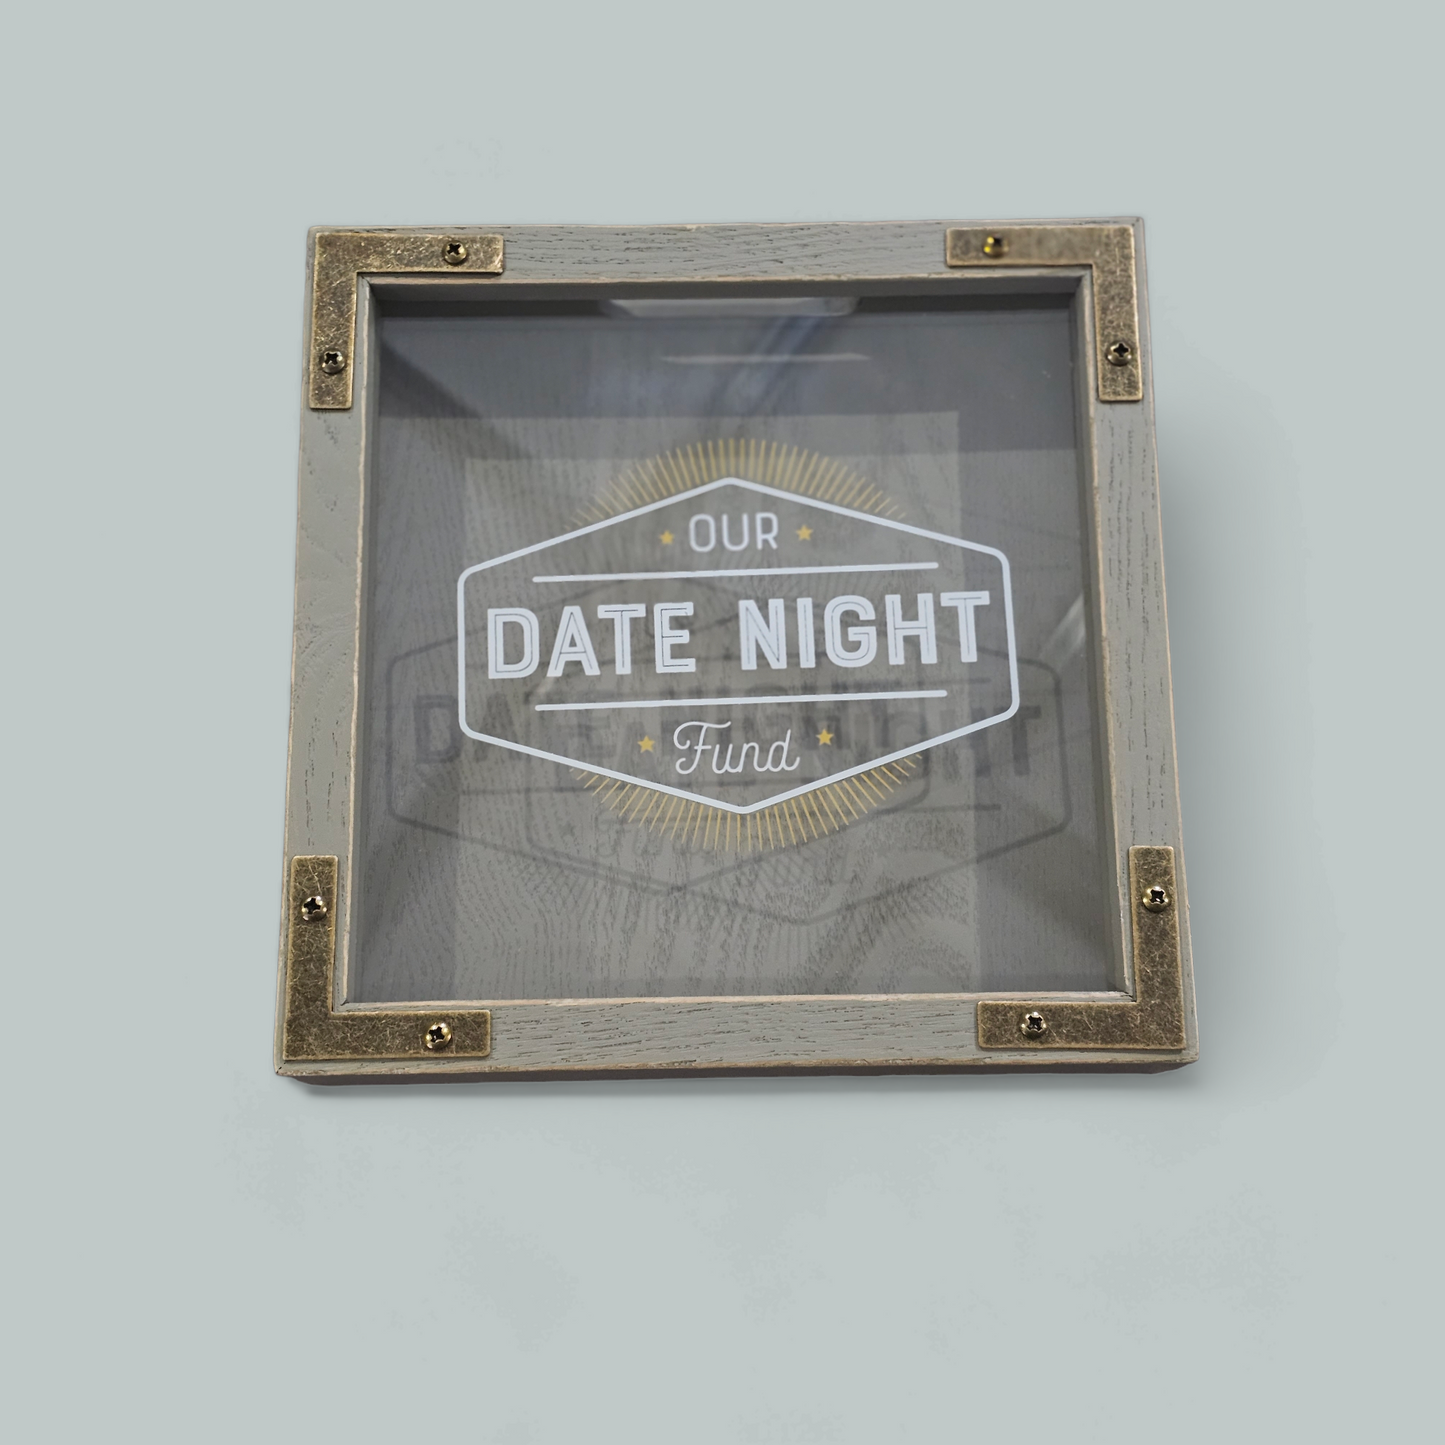 Keep Your Date Nights Alive with Our Date Night Fund Wooden Savings Box